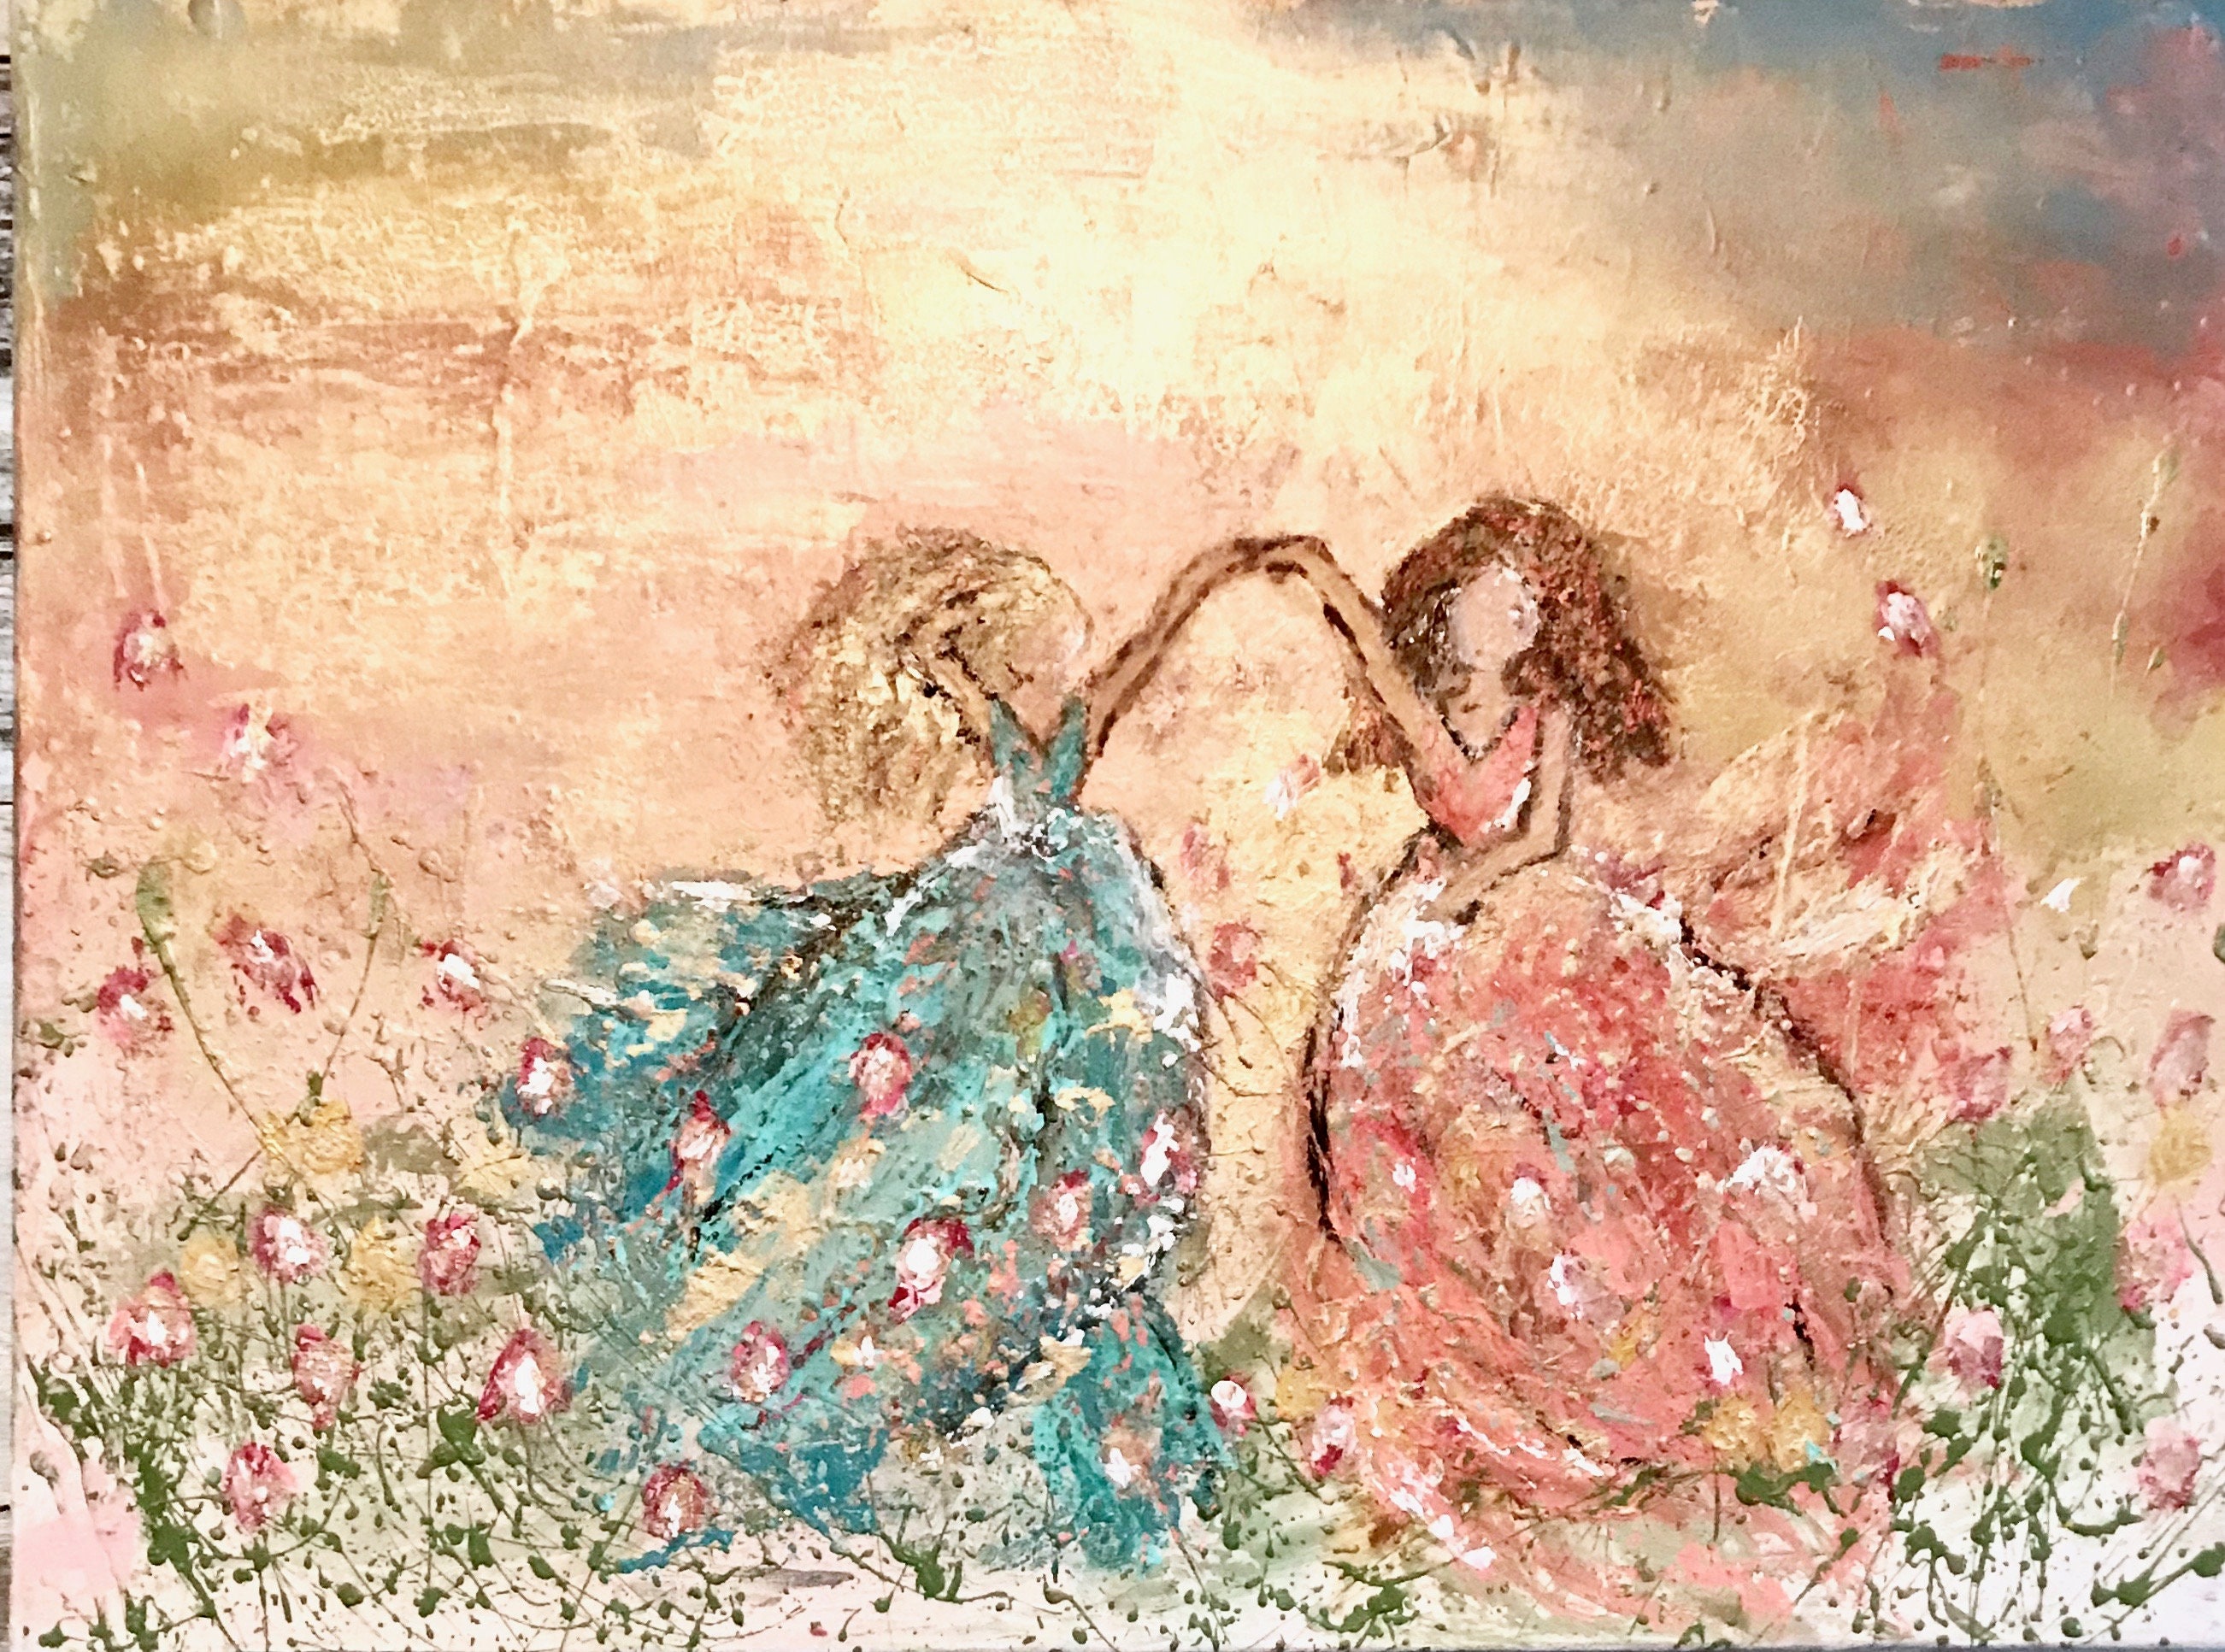 Painted Canvas Textured Dancing Girls Flowers Acrylics Etsy